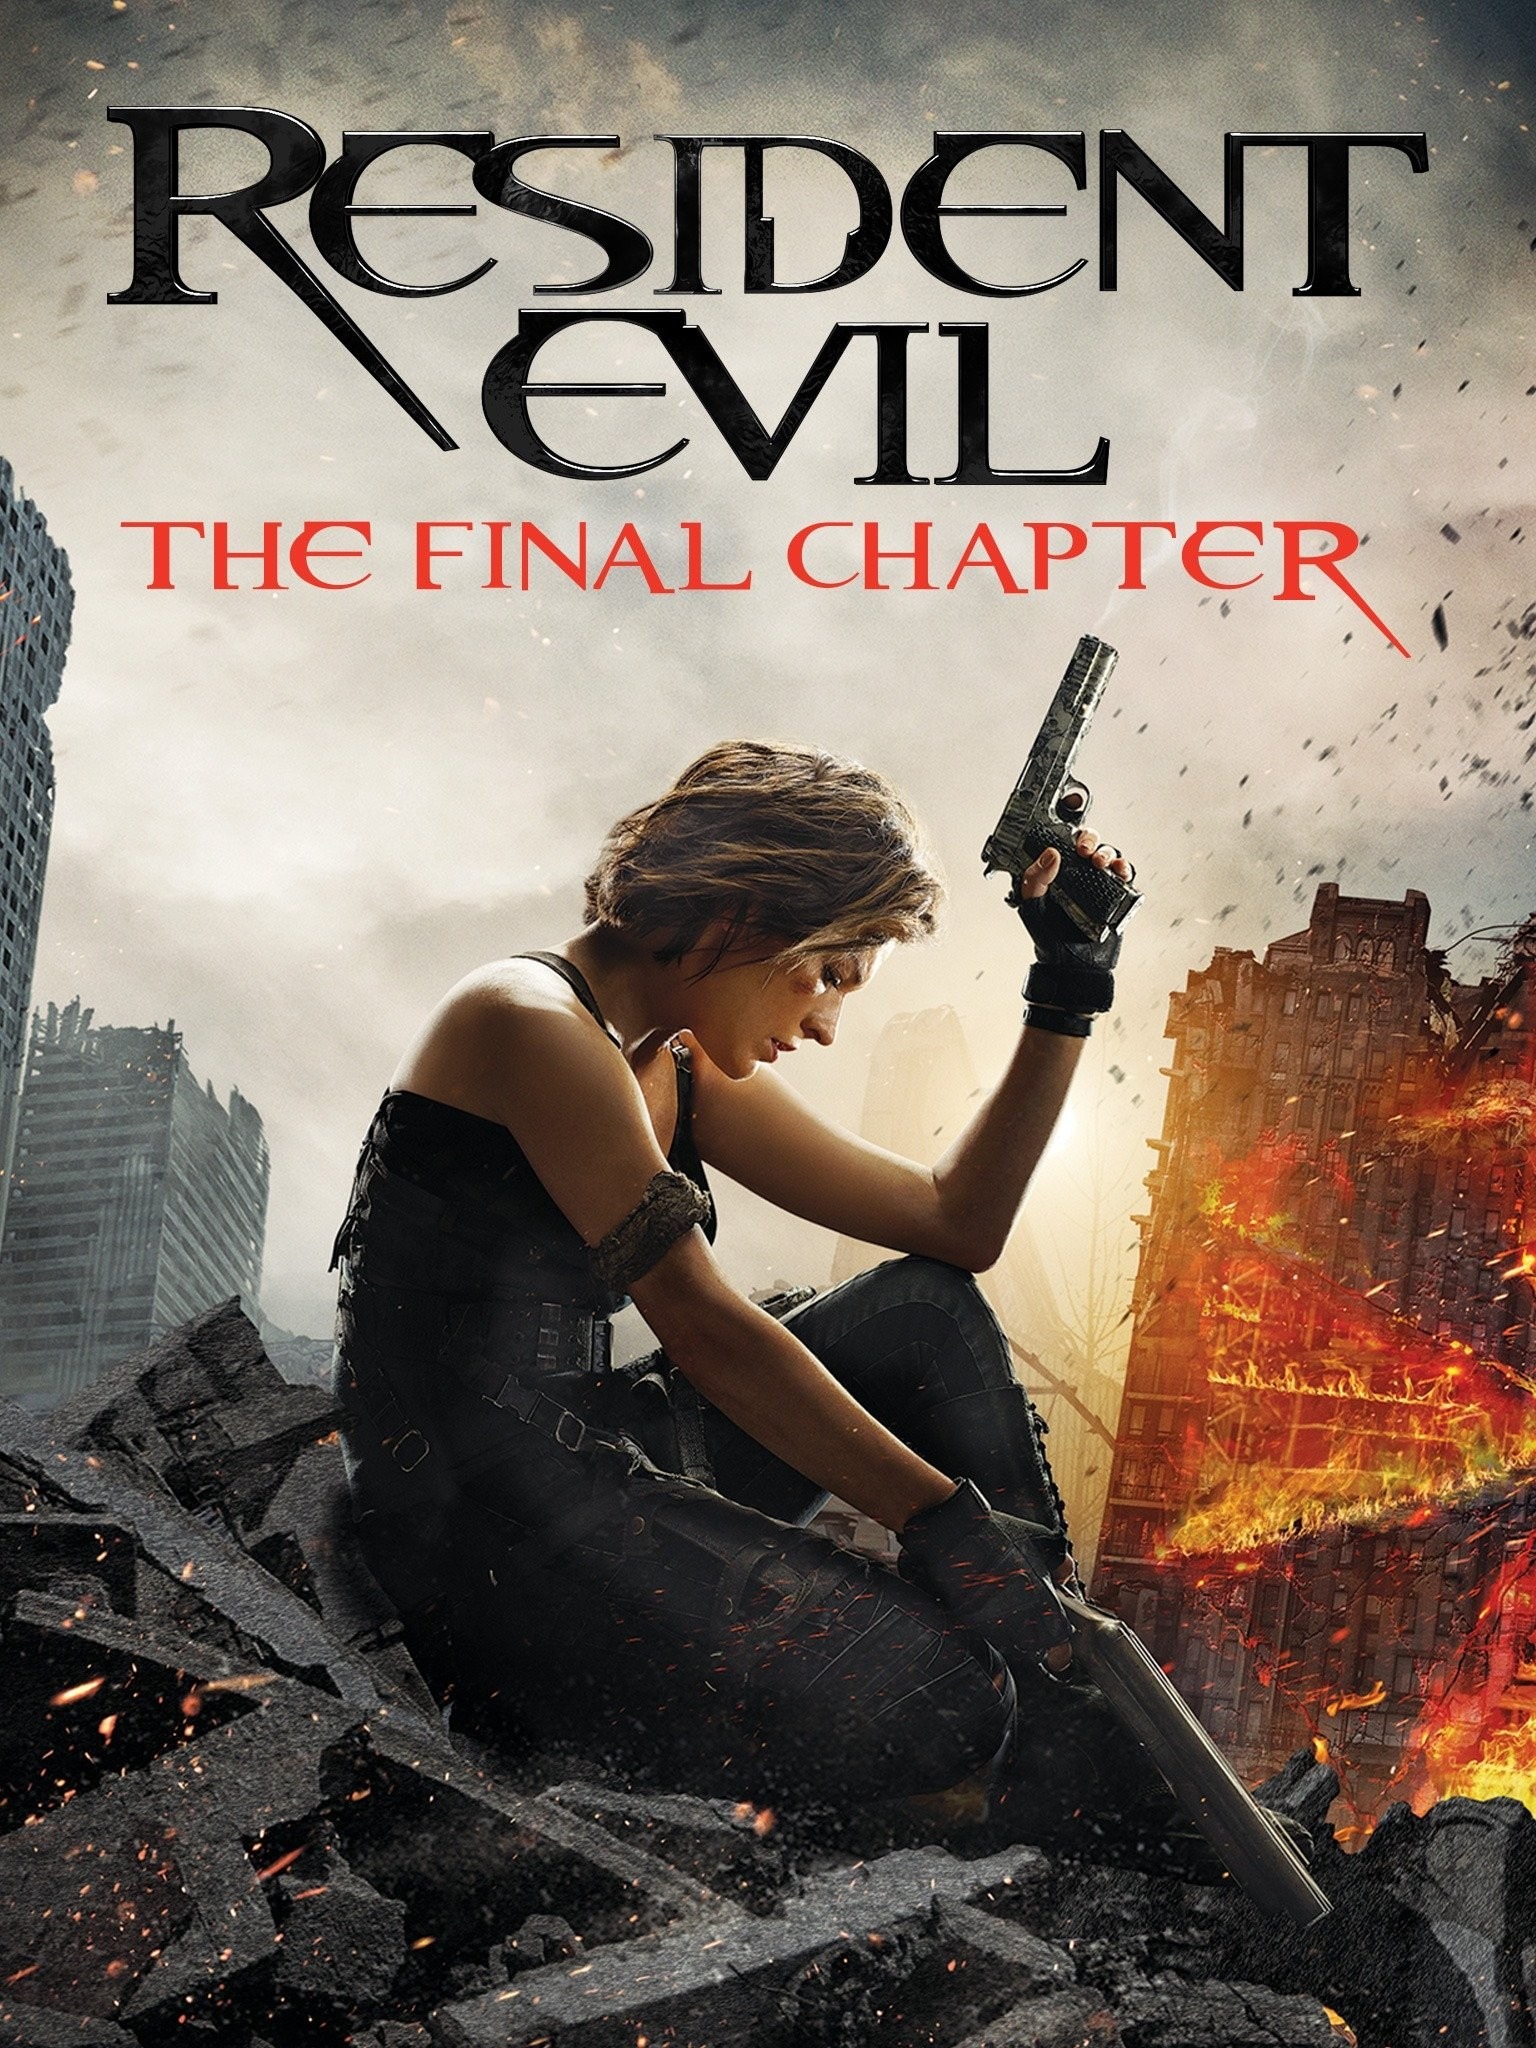 Resident Evil - Final Chapter - $7.99 in UHD and 4K